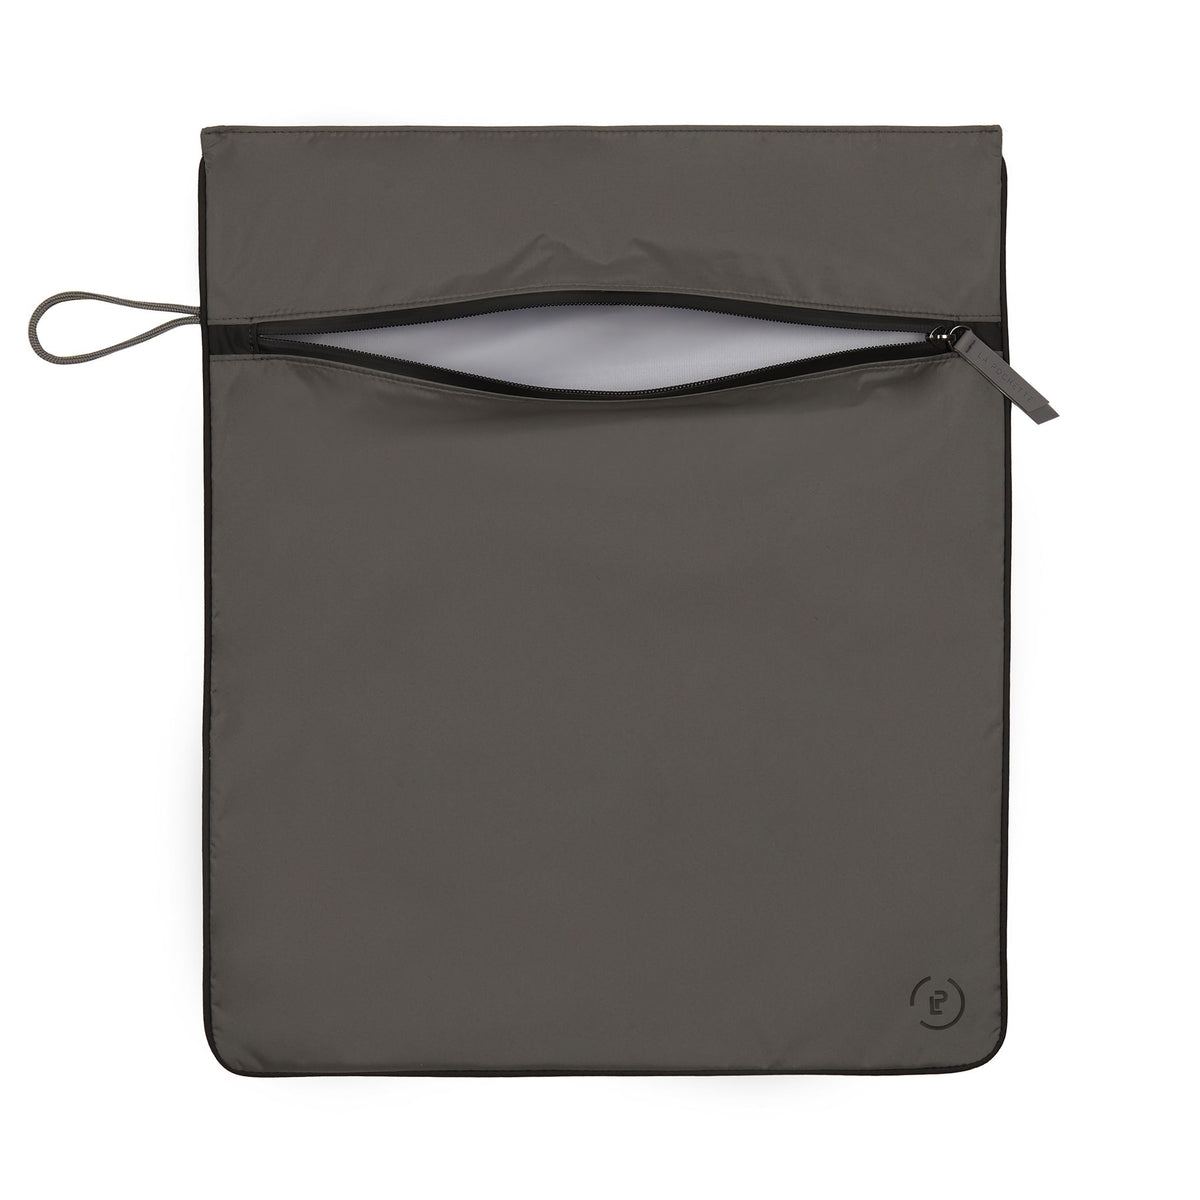 Kit Bag in Pewter Ink colourway unzipped showing inner lining